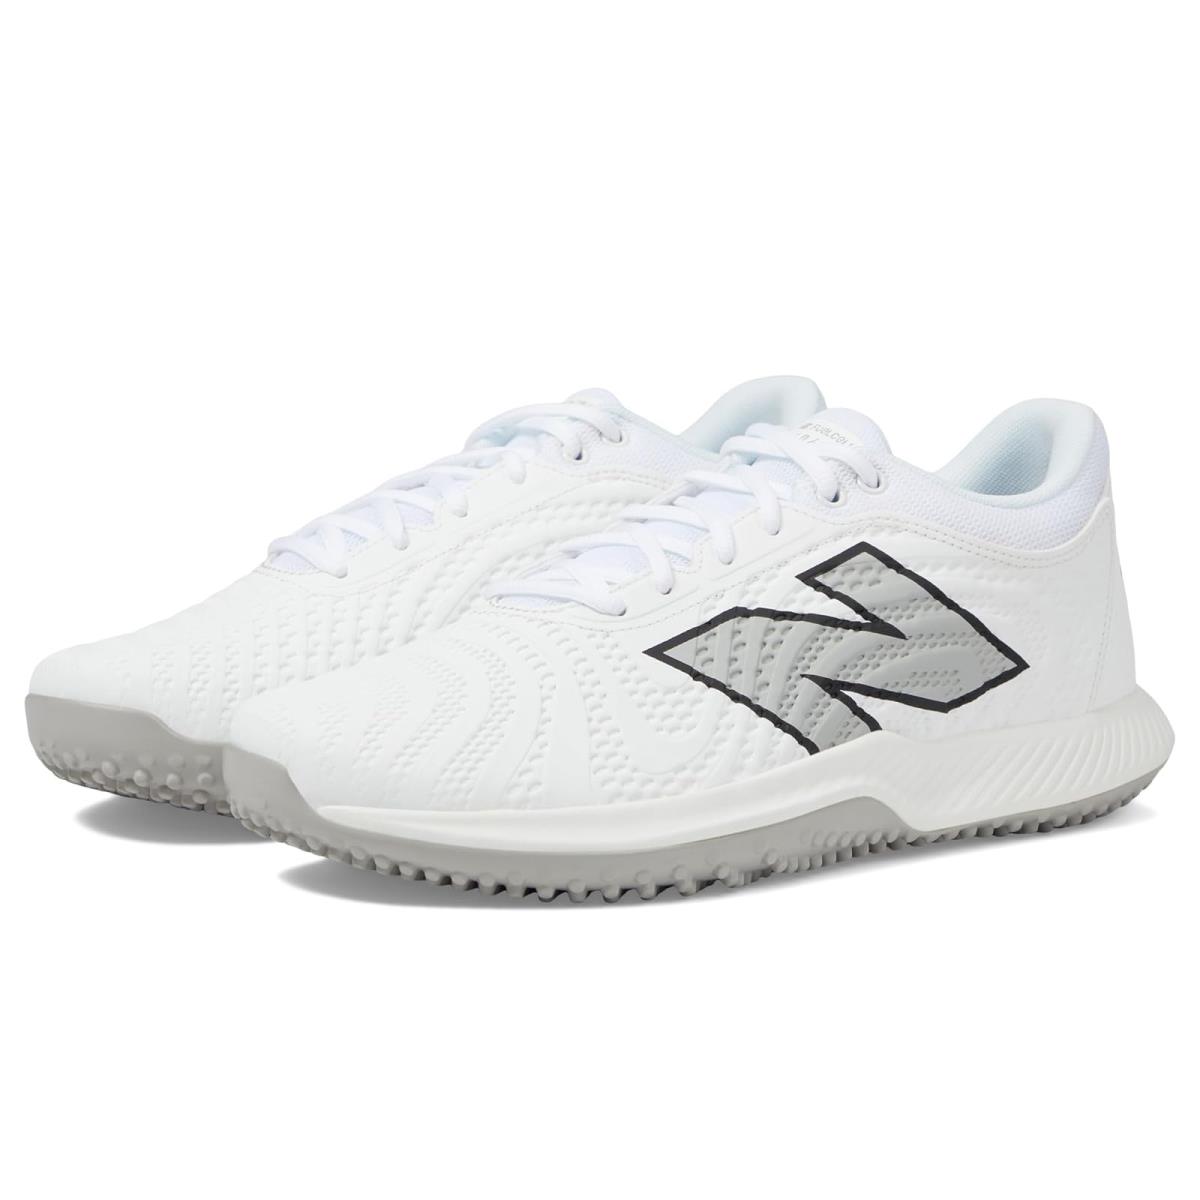 Unisex Sneakers Athletic Shoes New Balance Fuelcell 4040v7 Turf Trainer Optic White/Raincloud